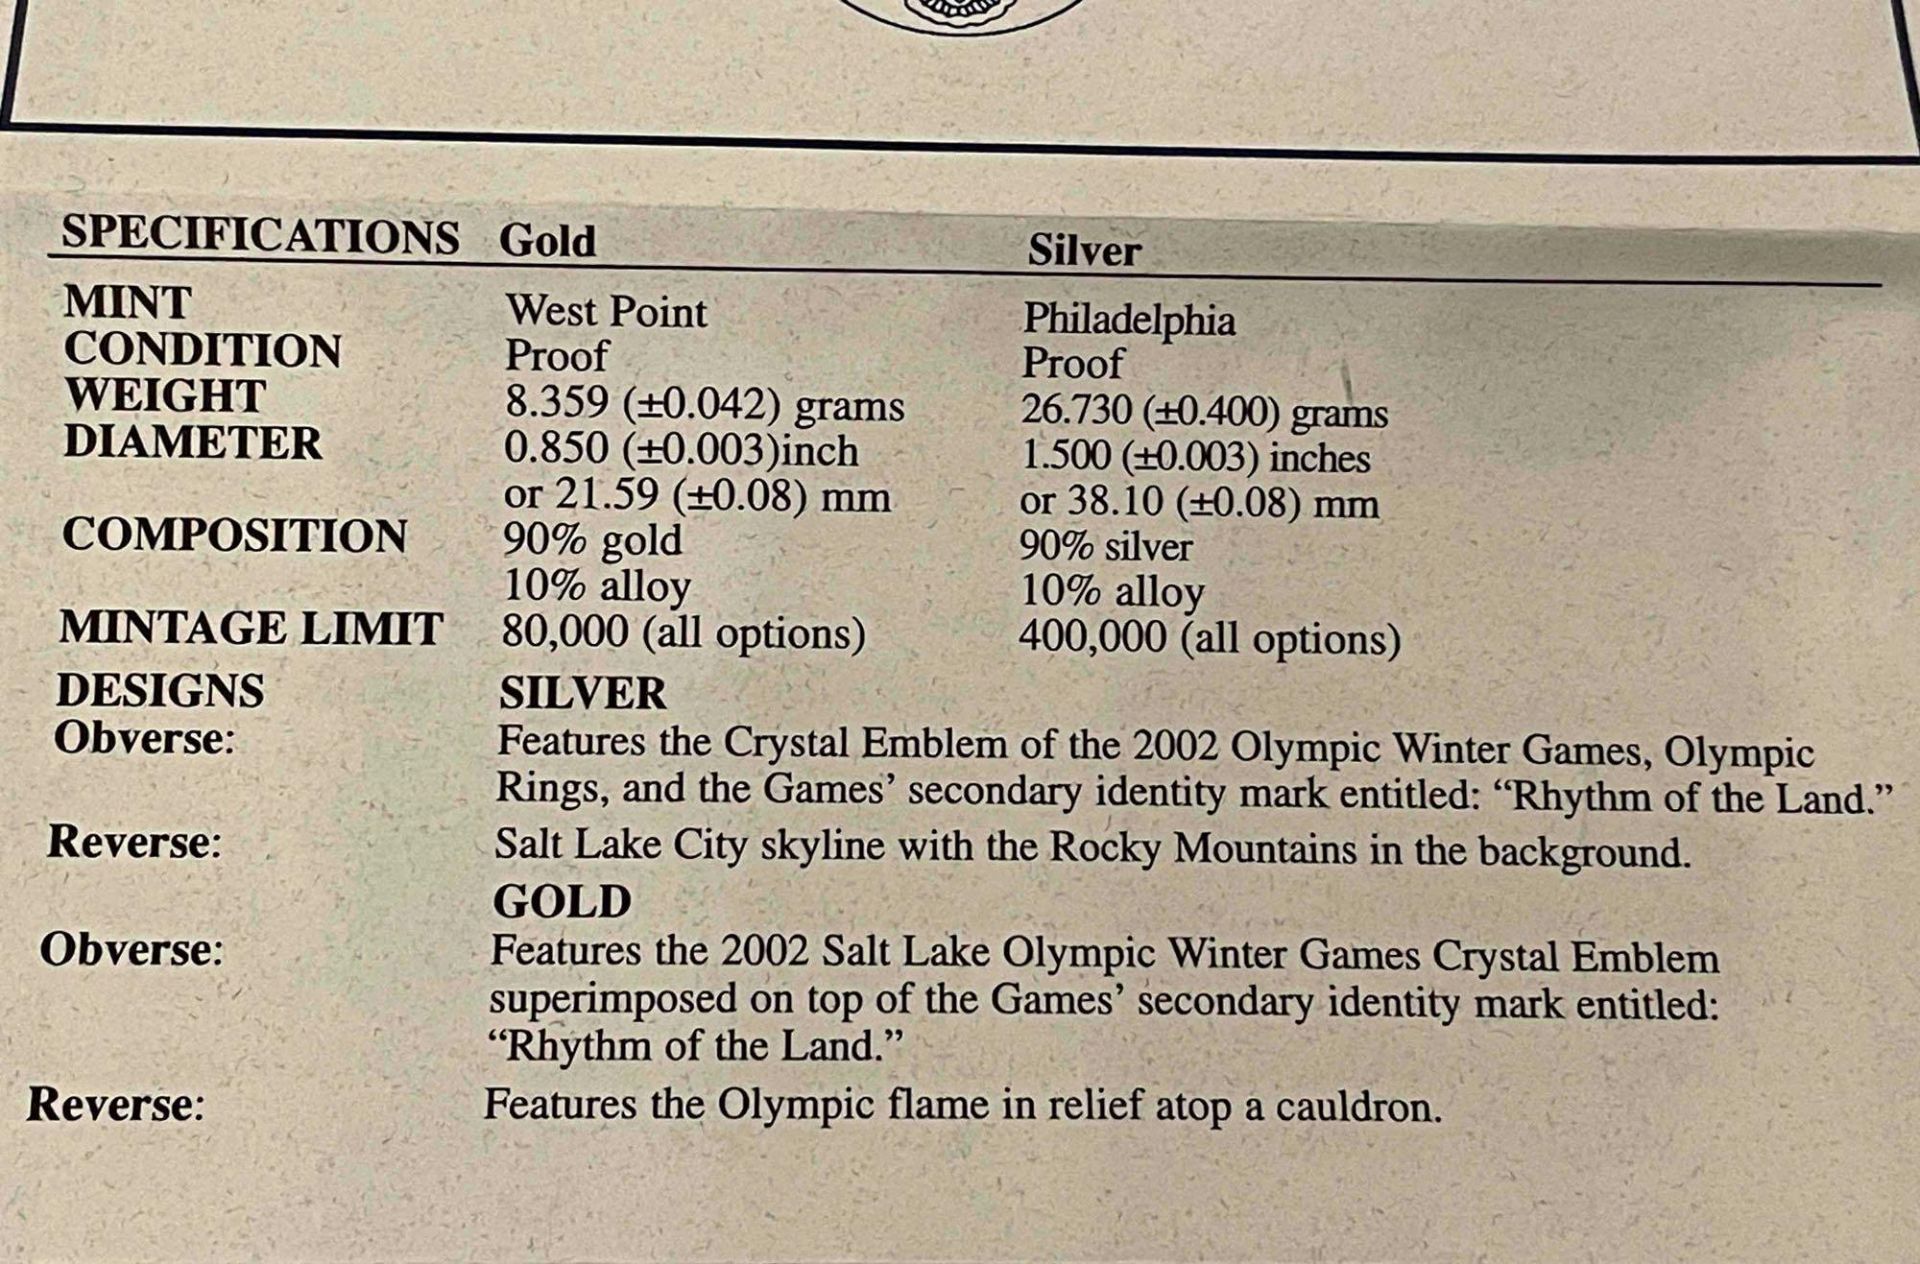 2002 W & P Salt Lake Olympic Winter Games Commemorative Two-Coin Set $5 Gold & $1 Silver Proofs - Image 10 of 11